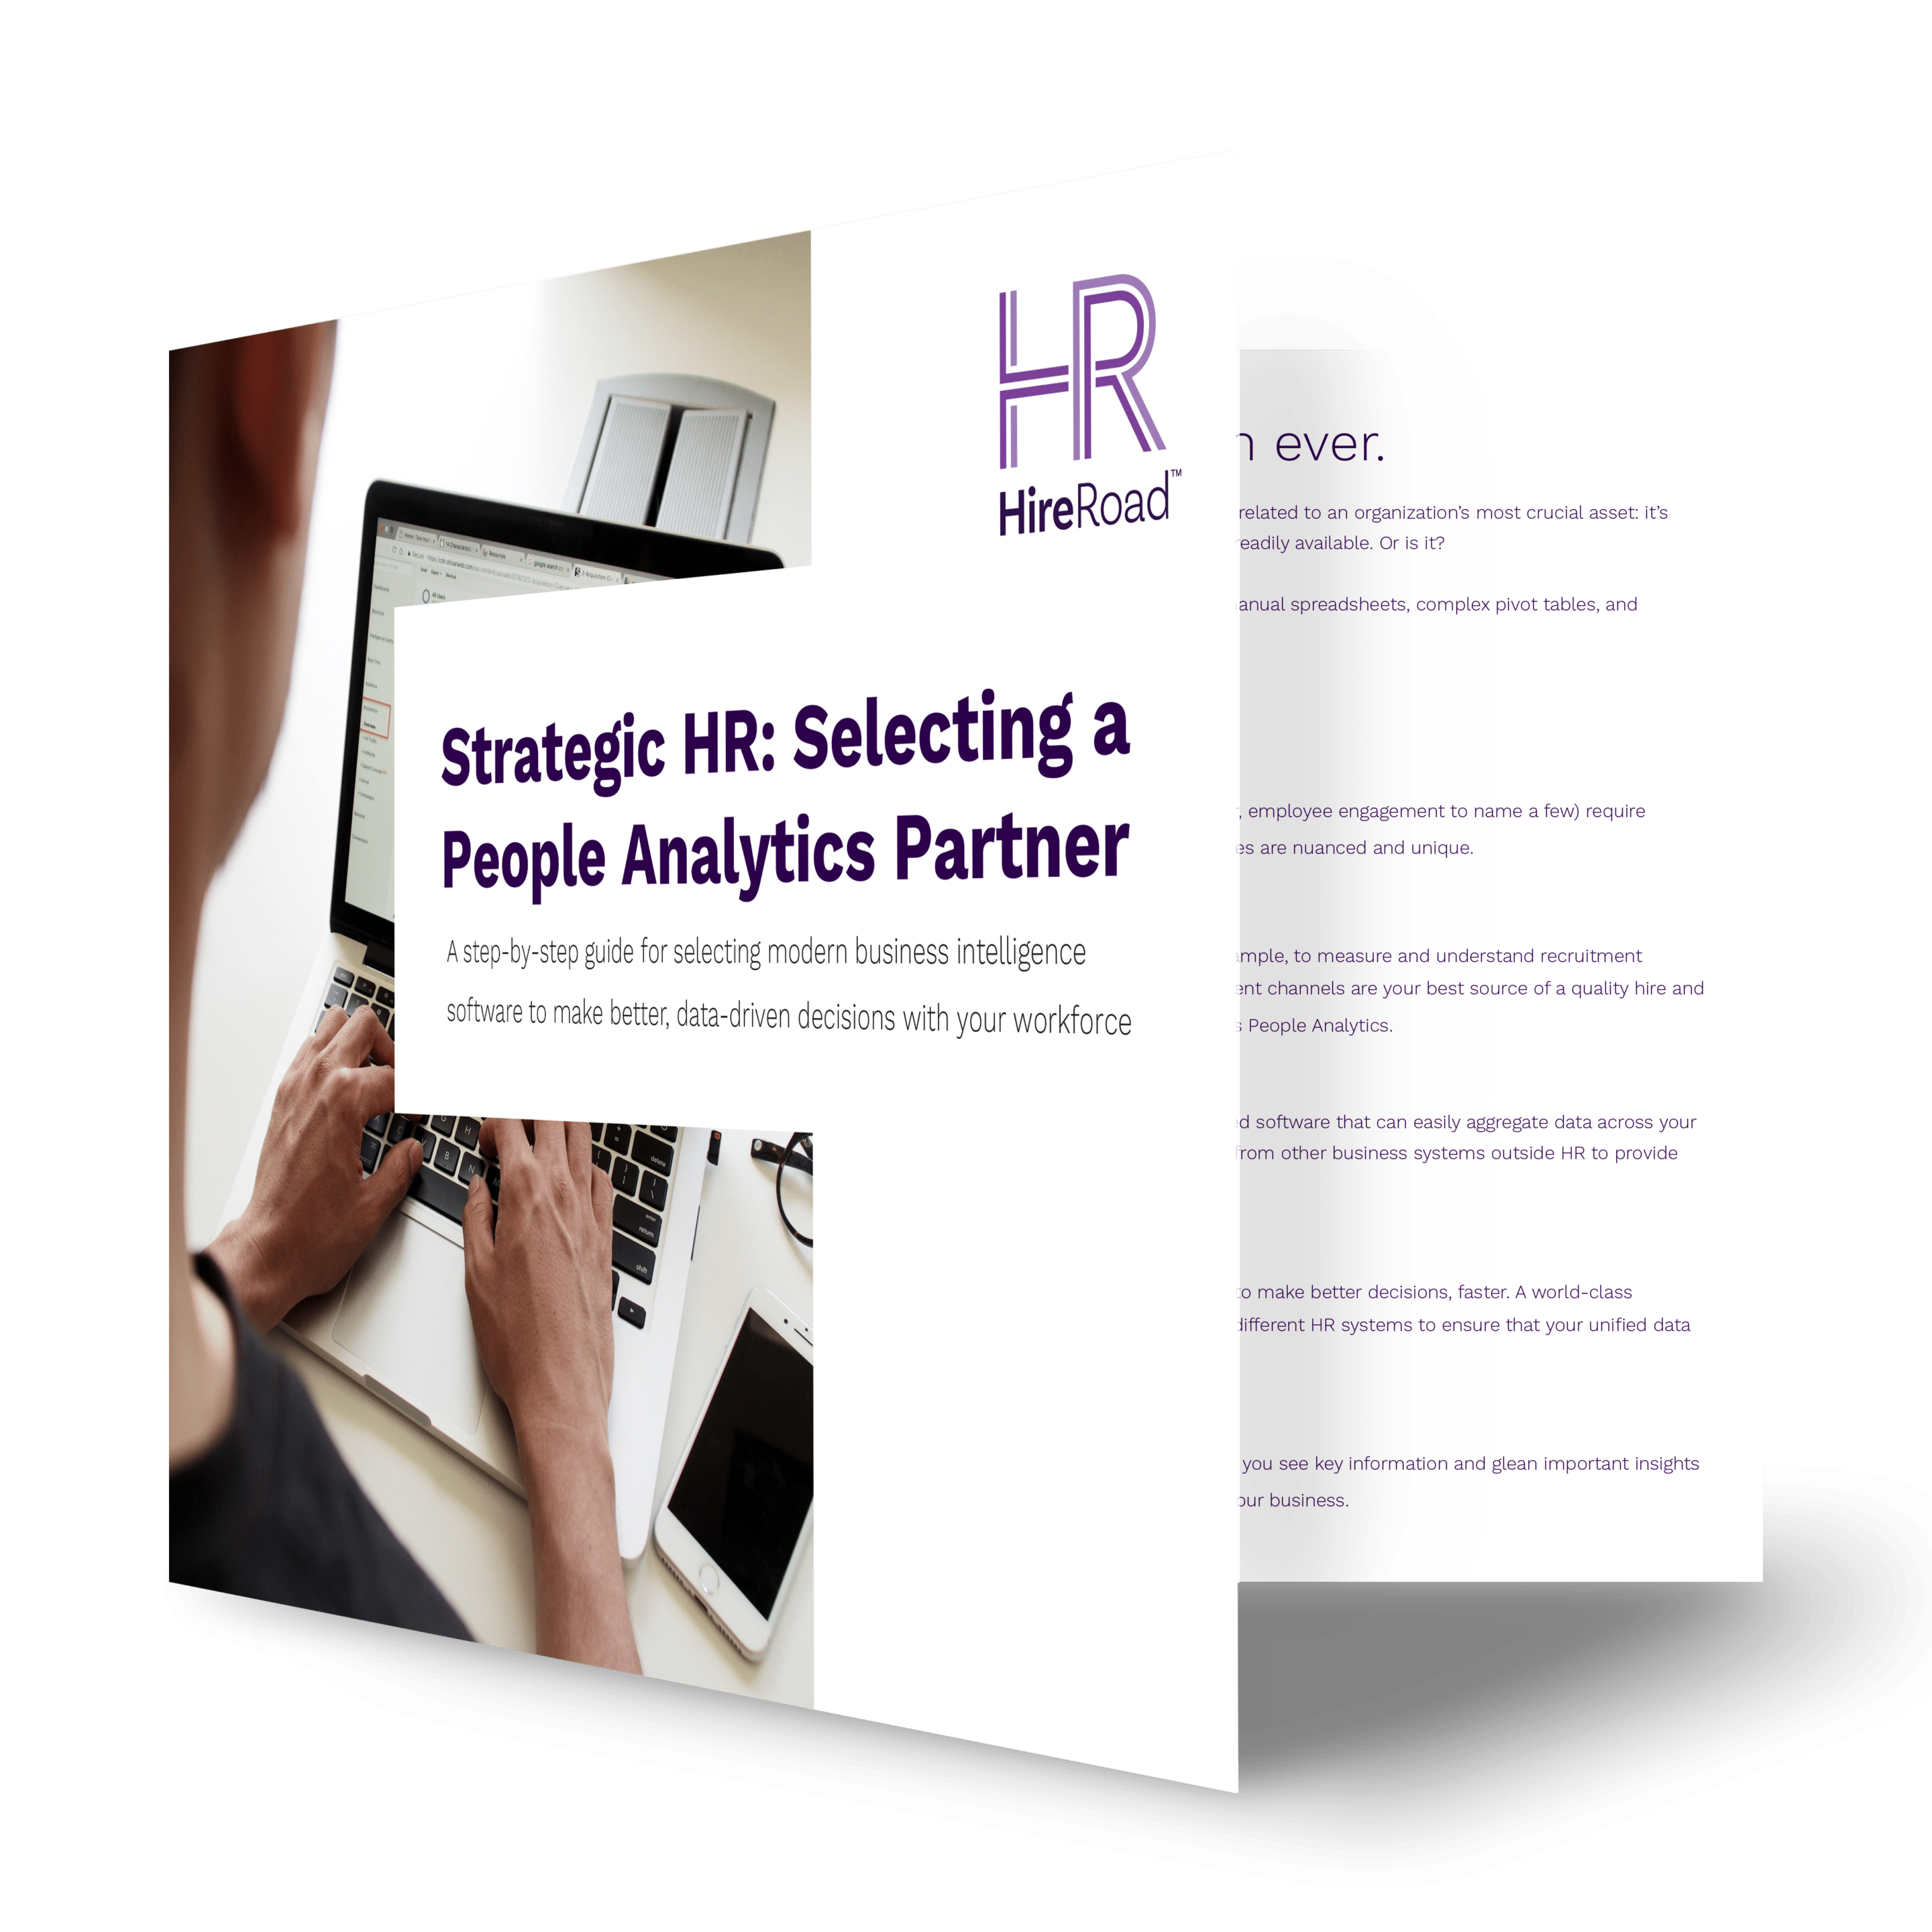 Strategic HR: Selecting a
People Analytics Partner eBook cover